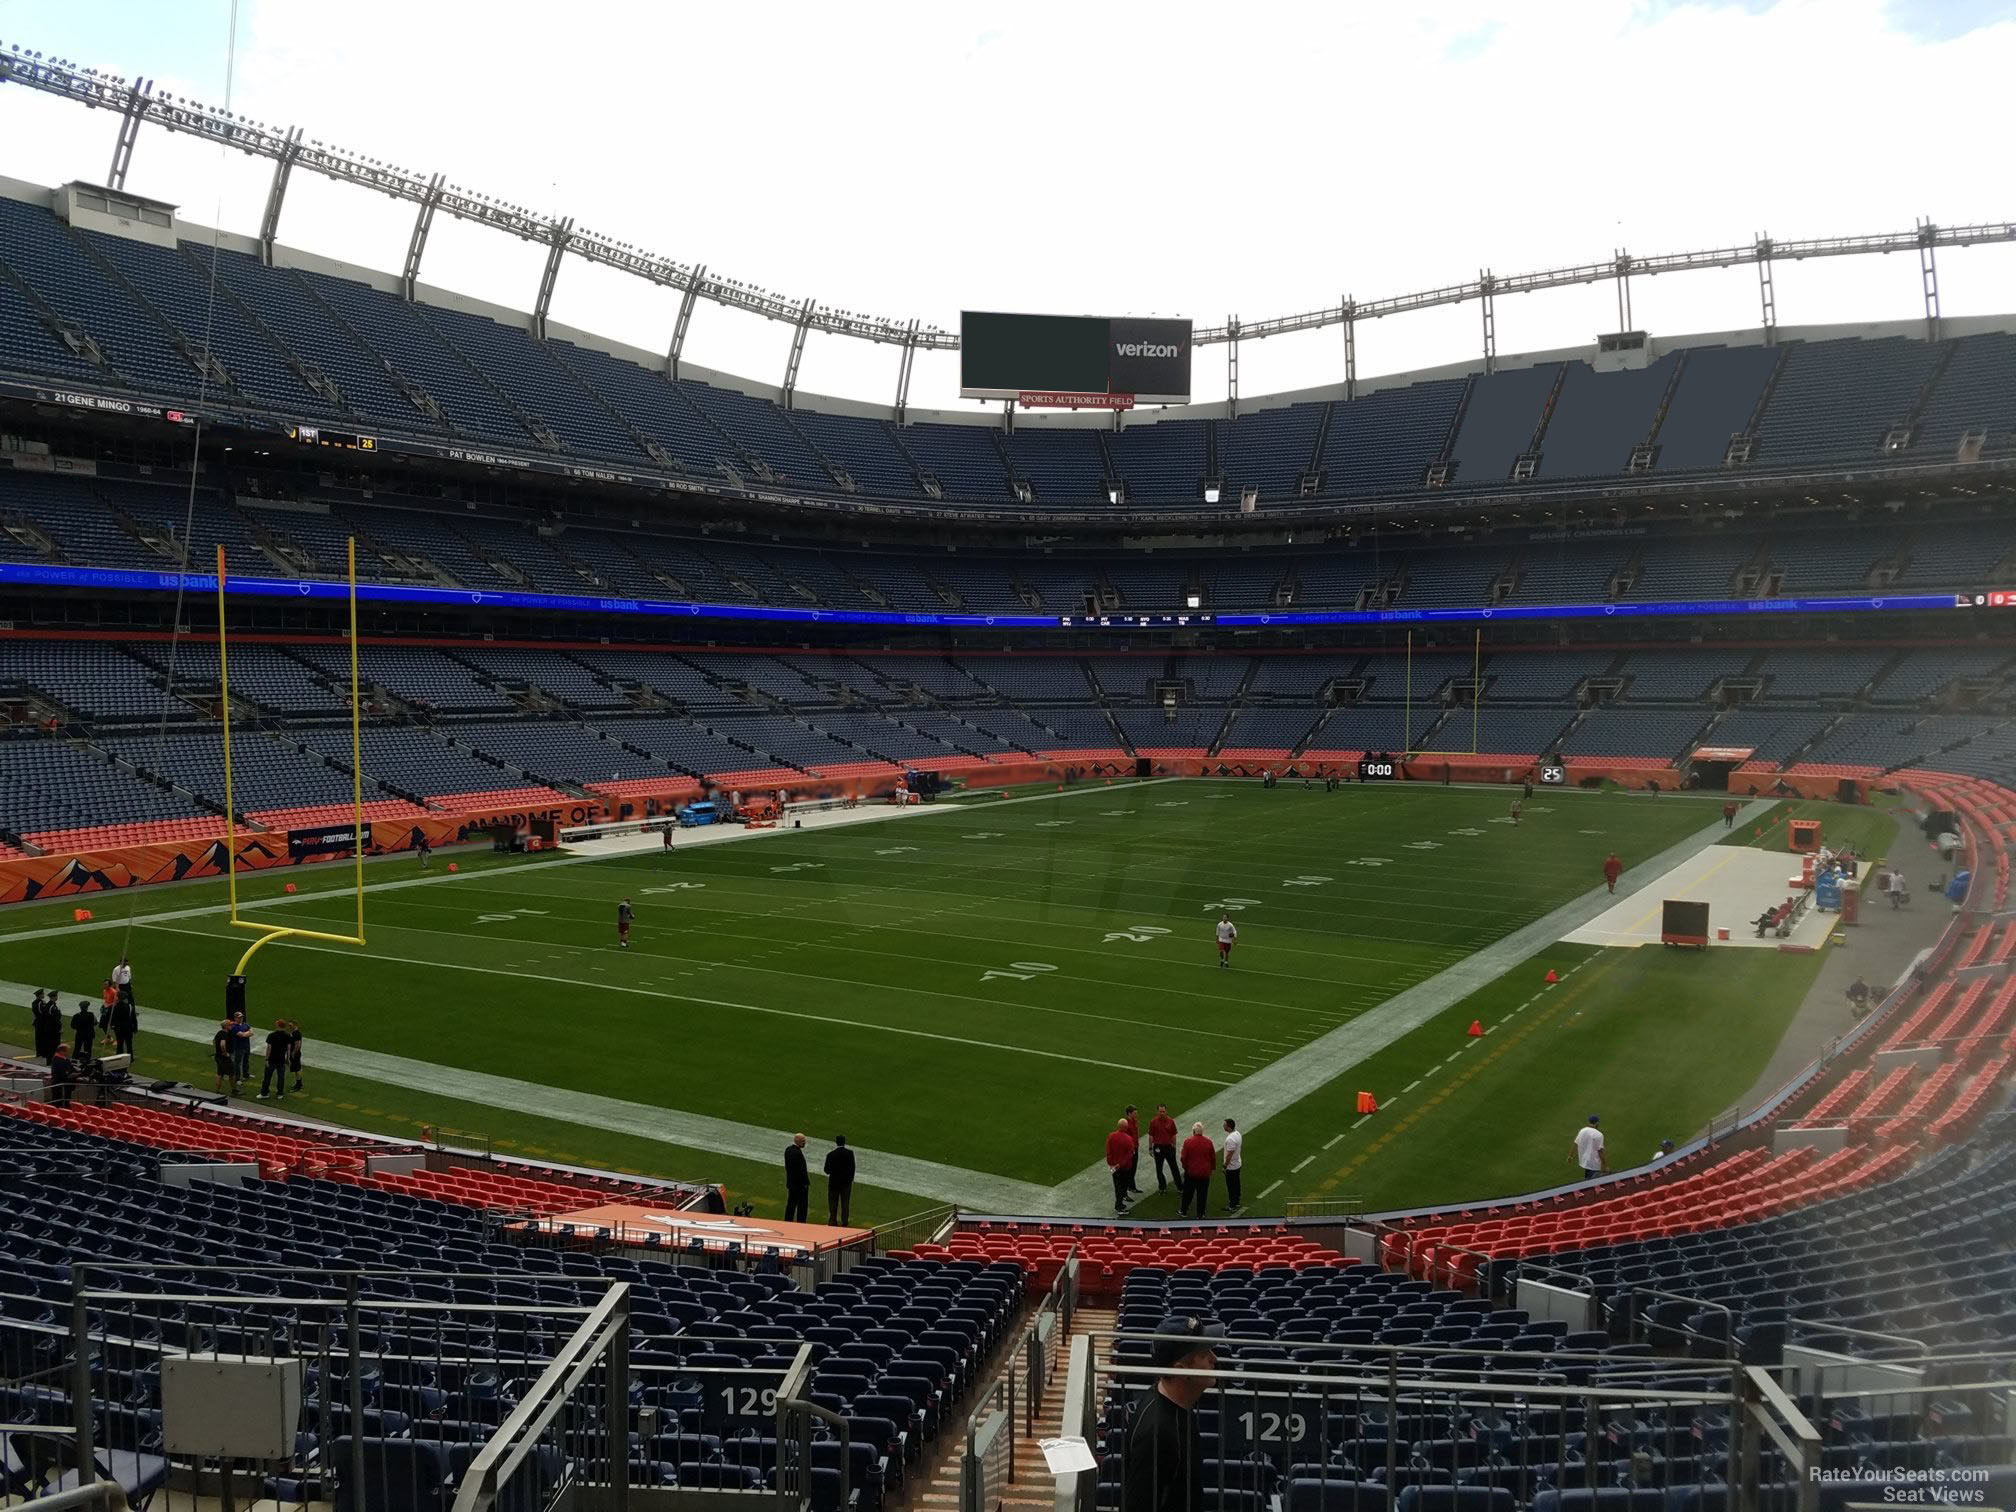 section 129, row 30 seat view  - empower field (at mile high)